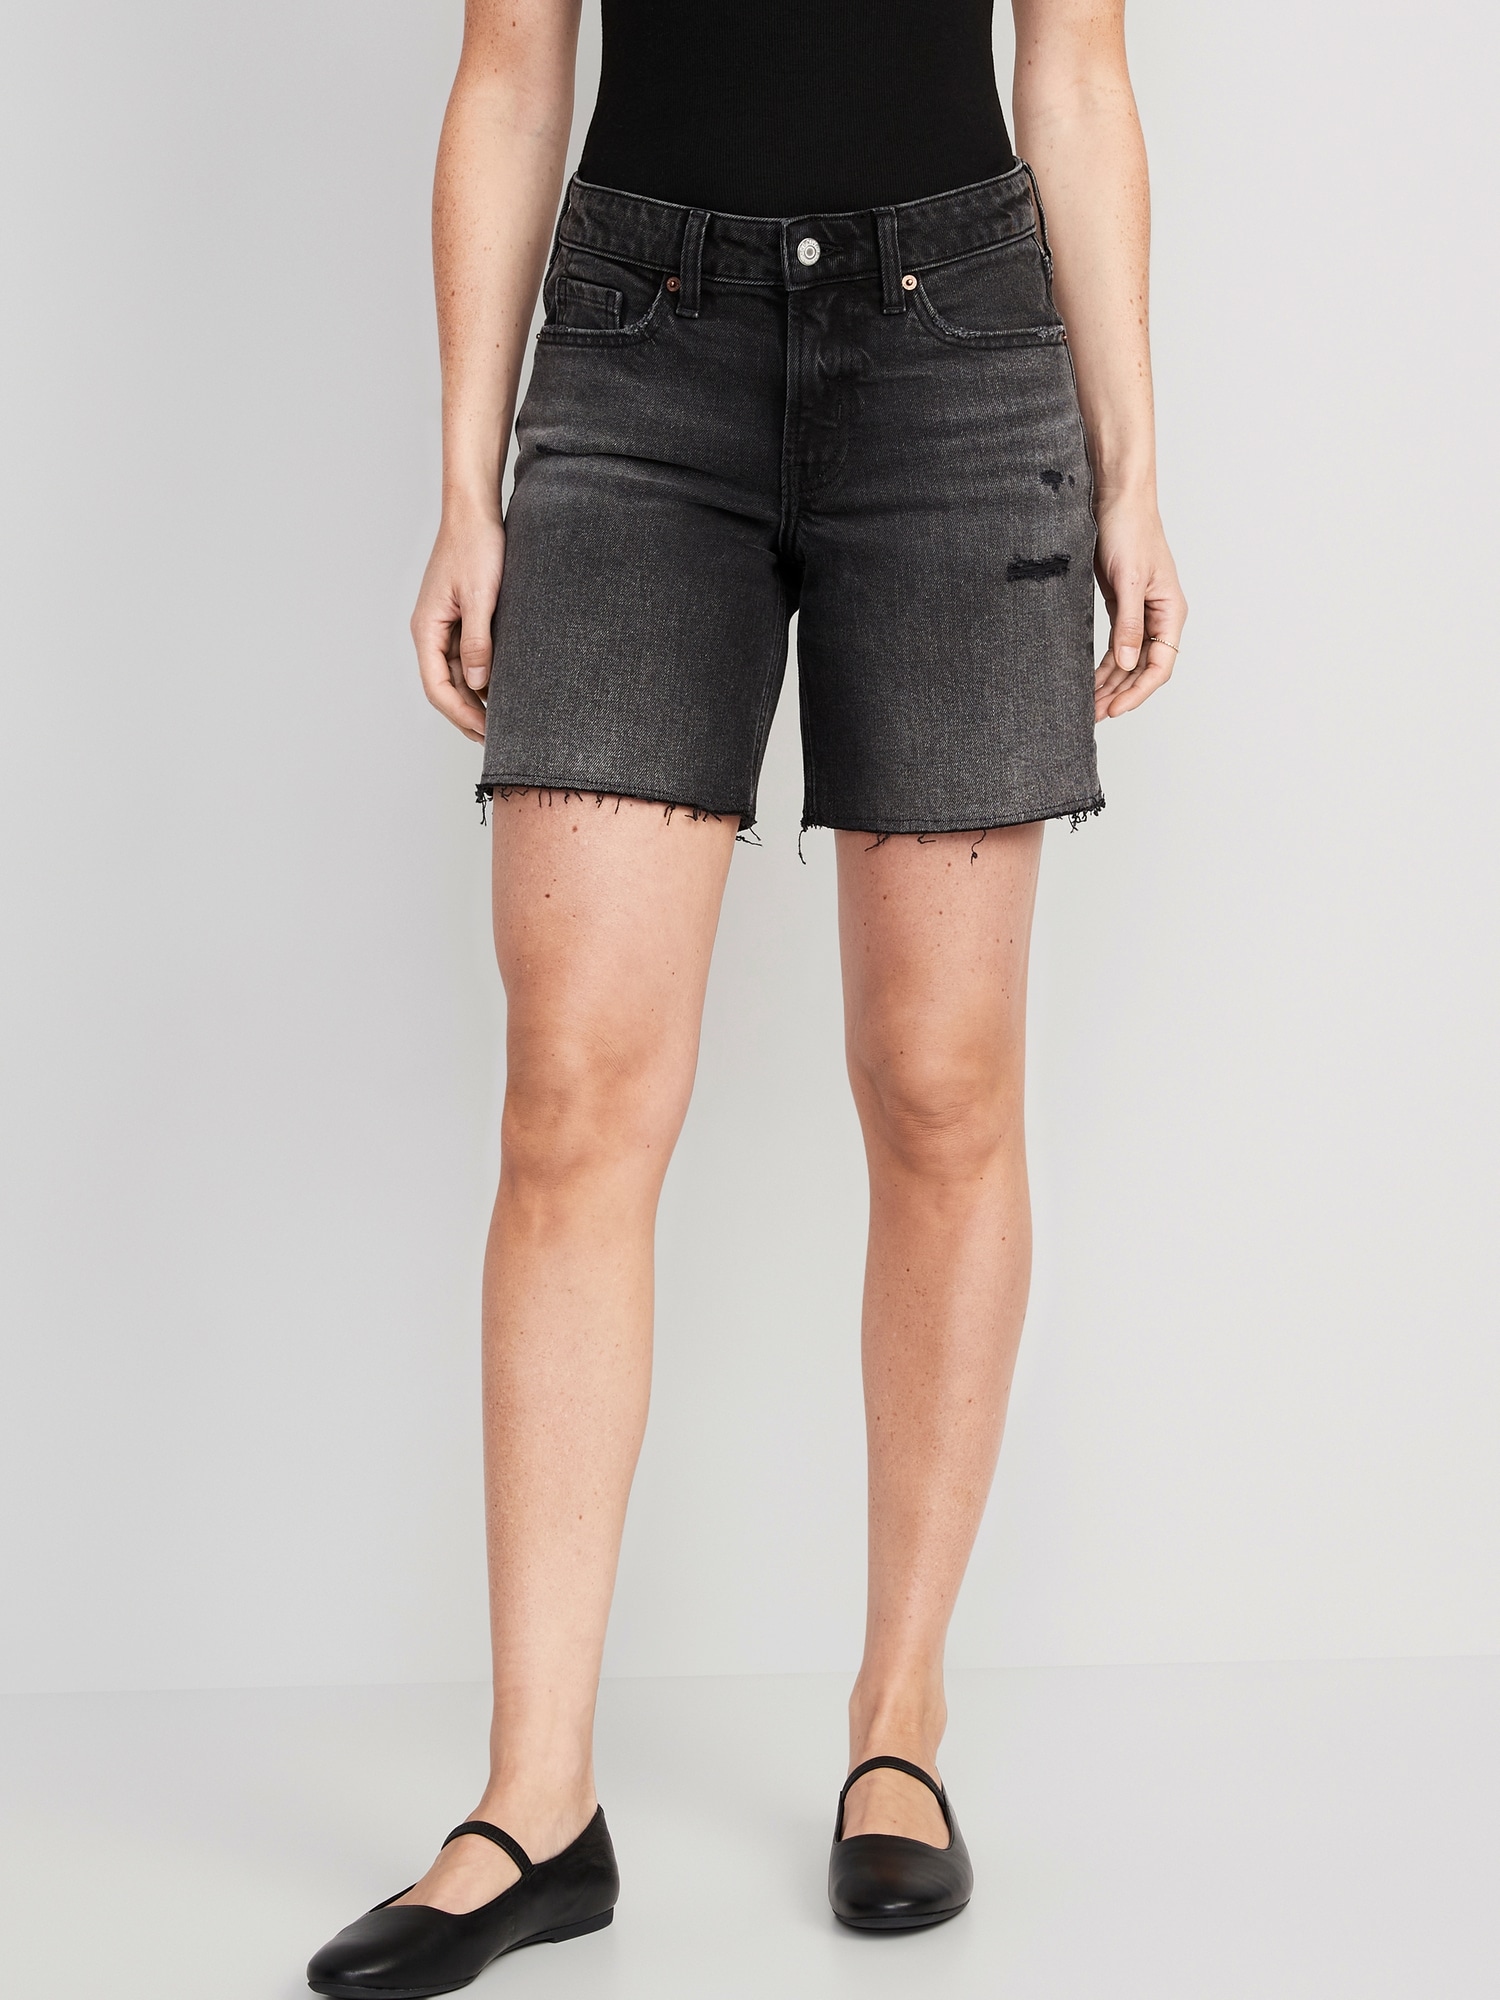 Old Navy Mid-Rise OG Loose Ripped Cut-Off Jean Shorts for Women -- 7-inch inseam black. 1